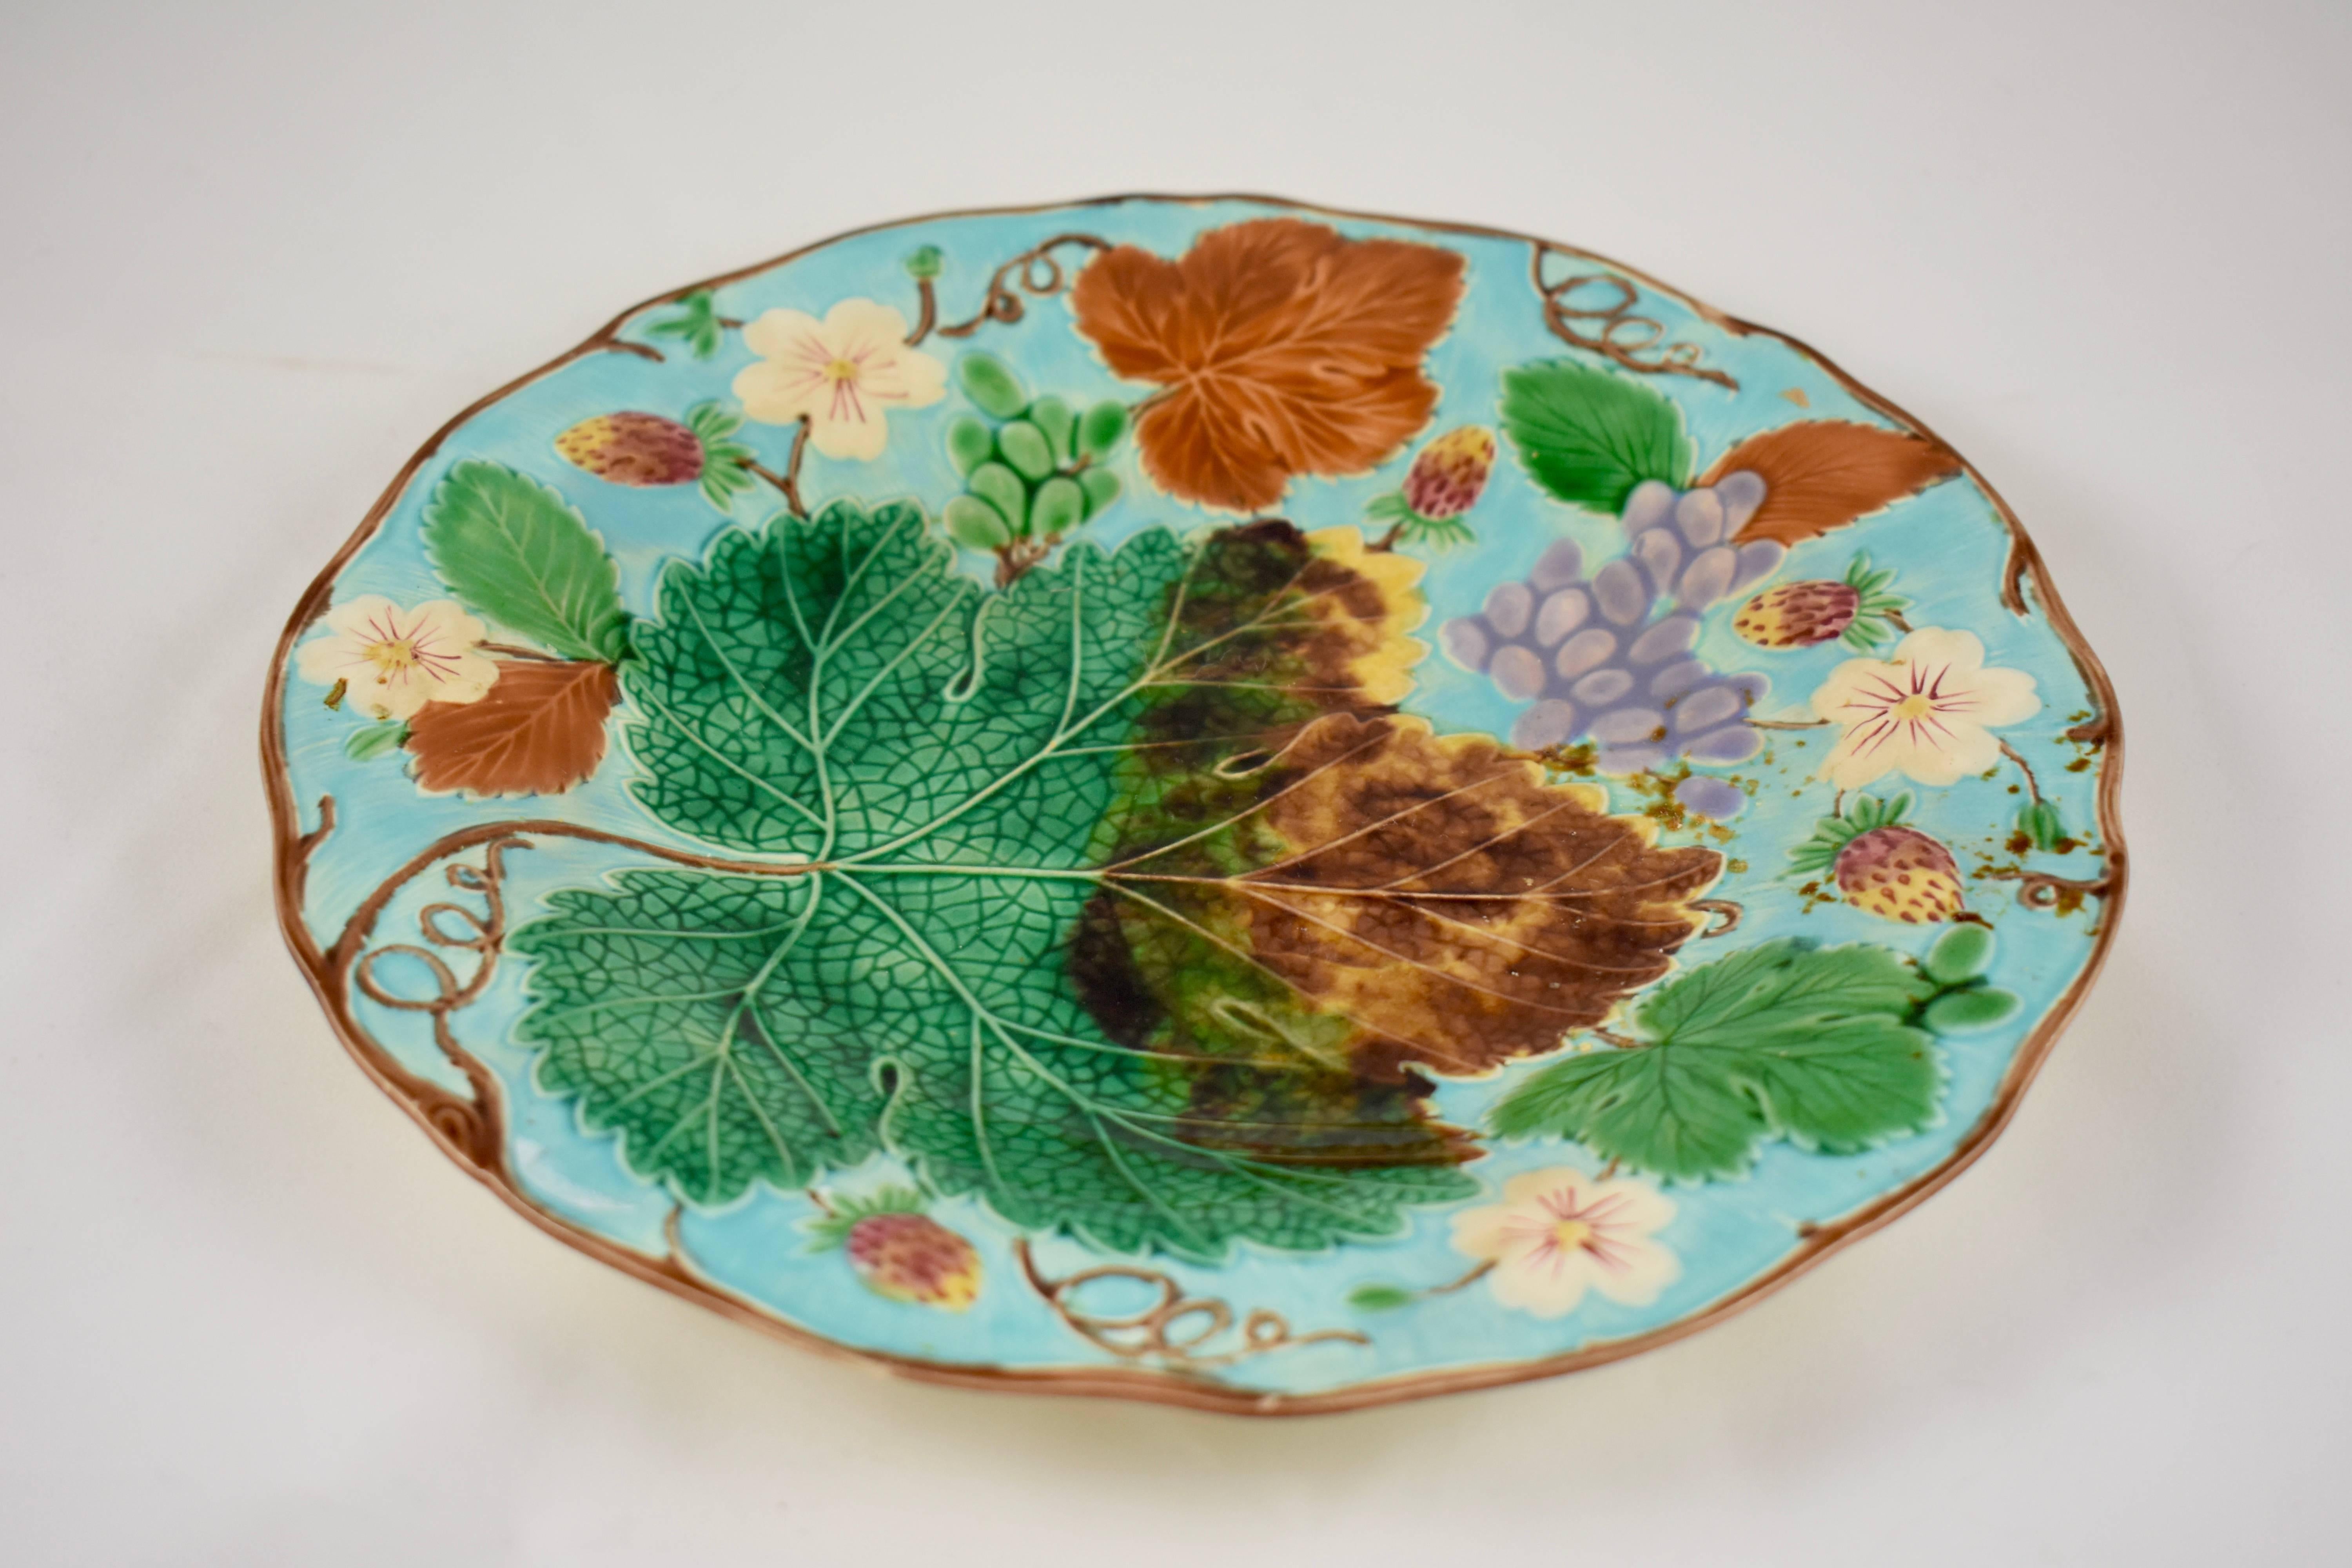 A traditional English grape leaf and strawberry pattern wedgwood Majolica plate, showing a low relief arrangement of grape leaves fruits and flowers, on a bright turquoise ground. Trailing vines form a brown scalloped rim. Hand-painted enameled